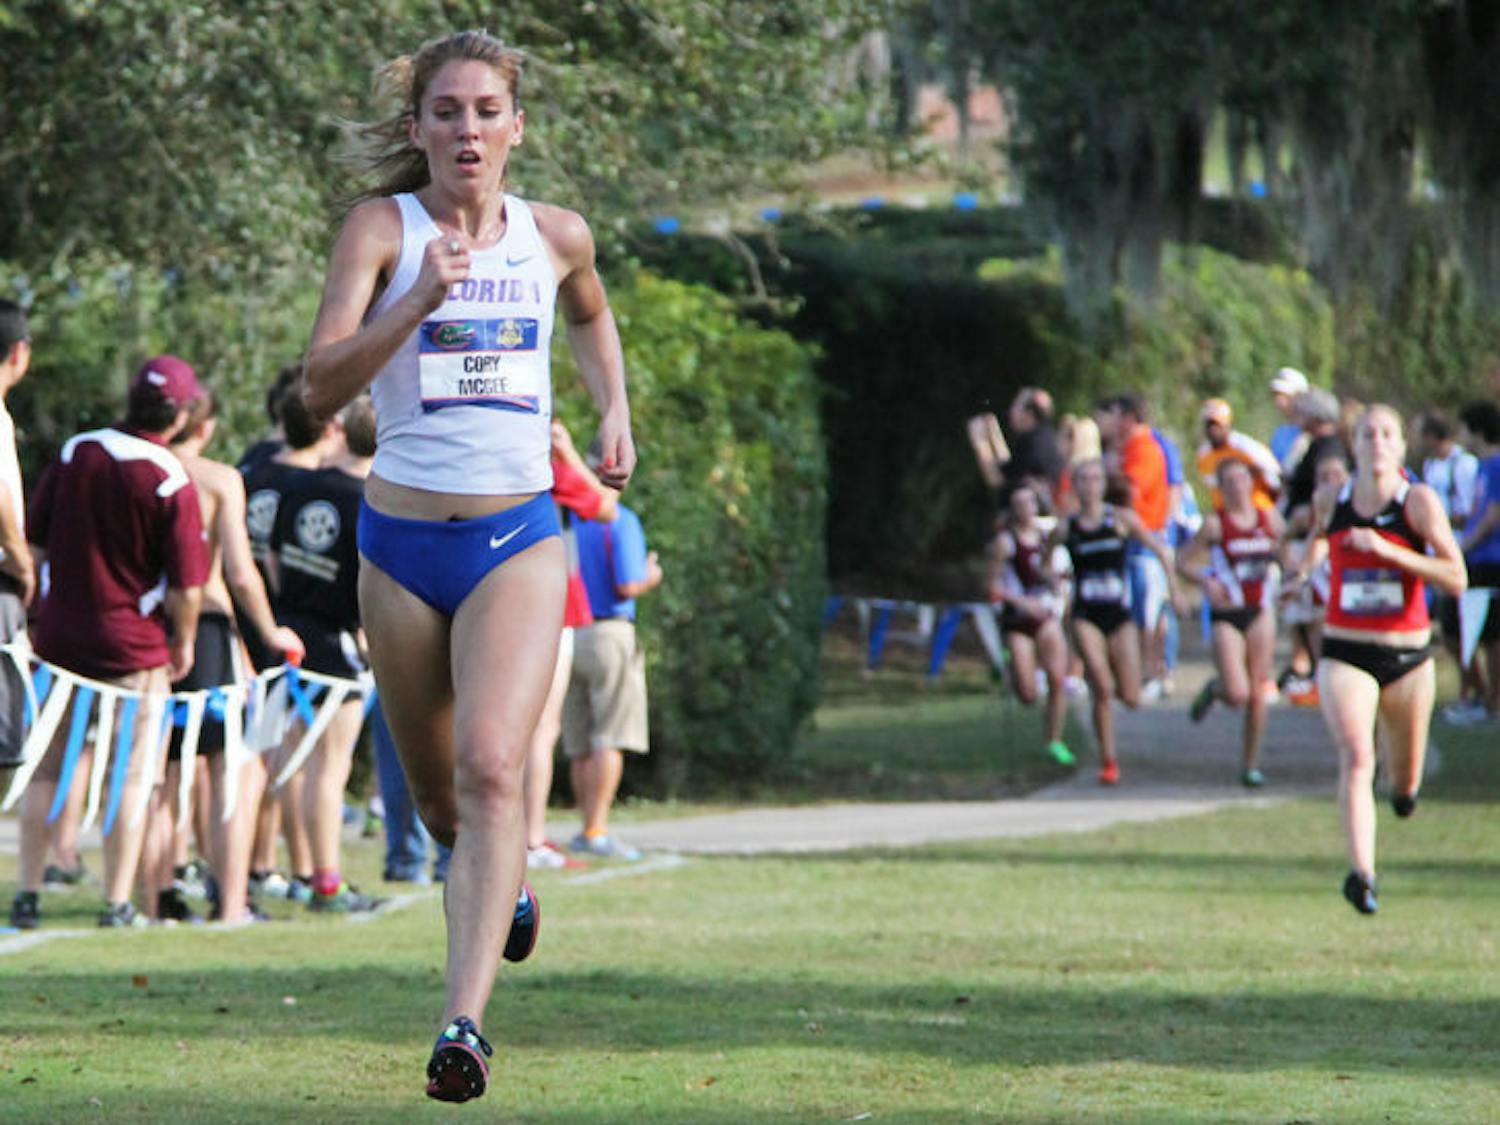 Cory McGee runs during the Southeastern Conference Championships on Nov. 1. McGee placed 16th in the race, as UF finished fourth.